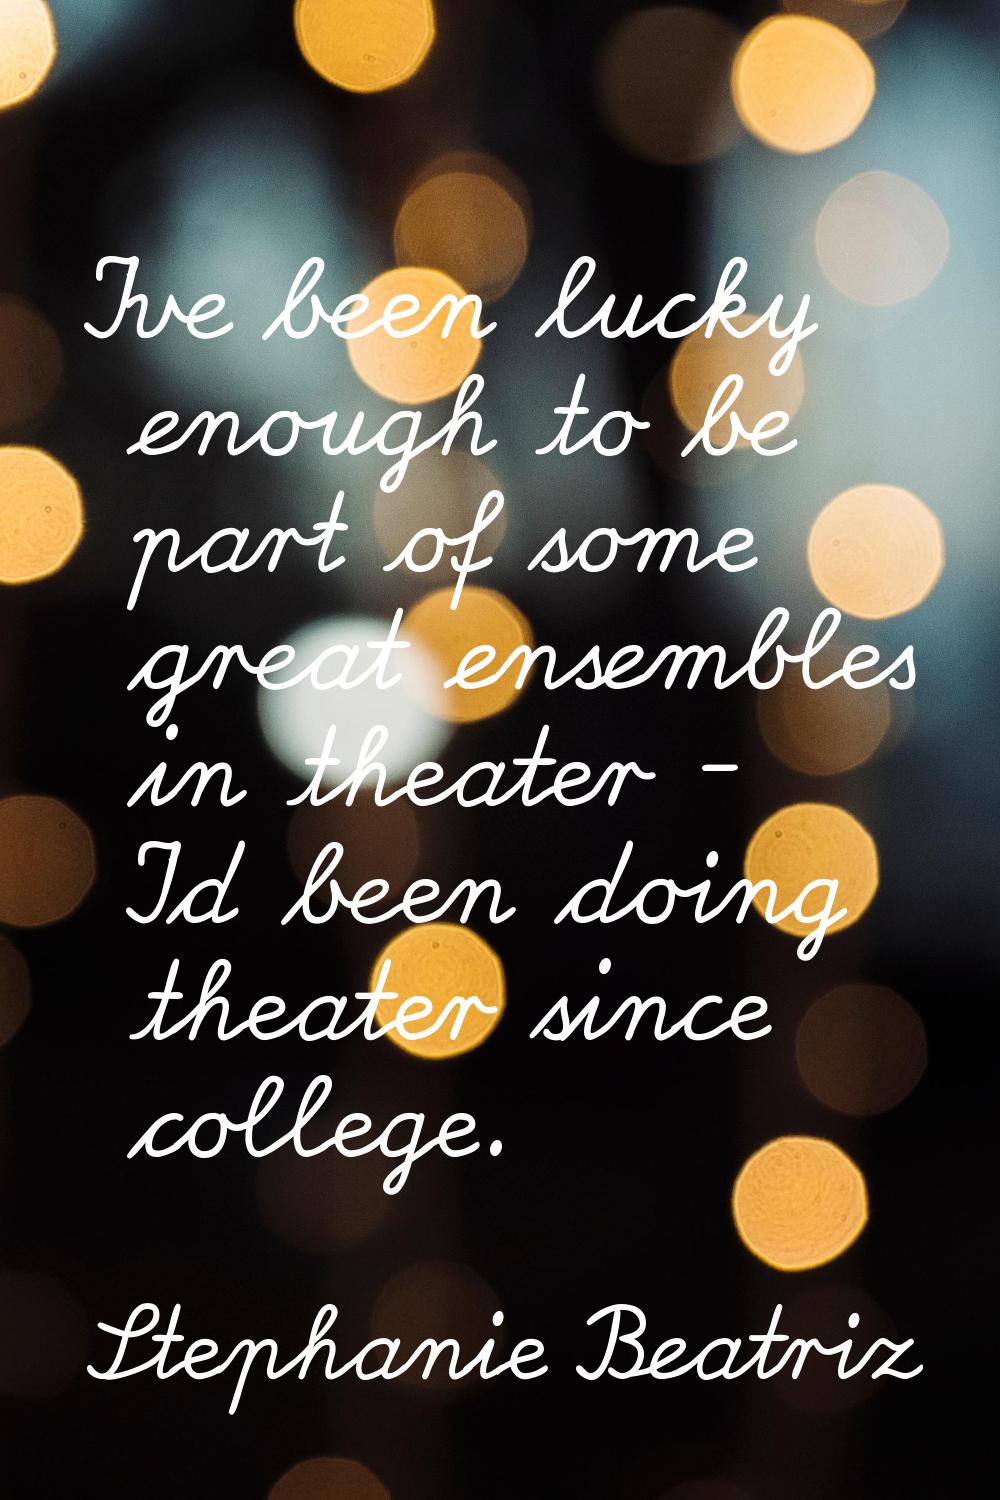 I've been lucky enough to be part of some great ensembles in theater - I'd been doing theater since